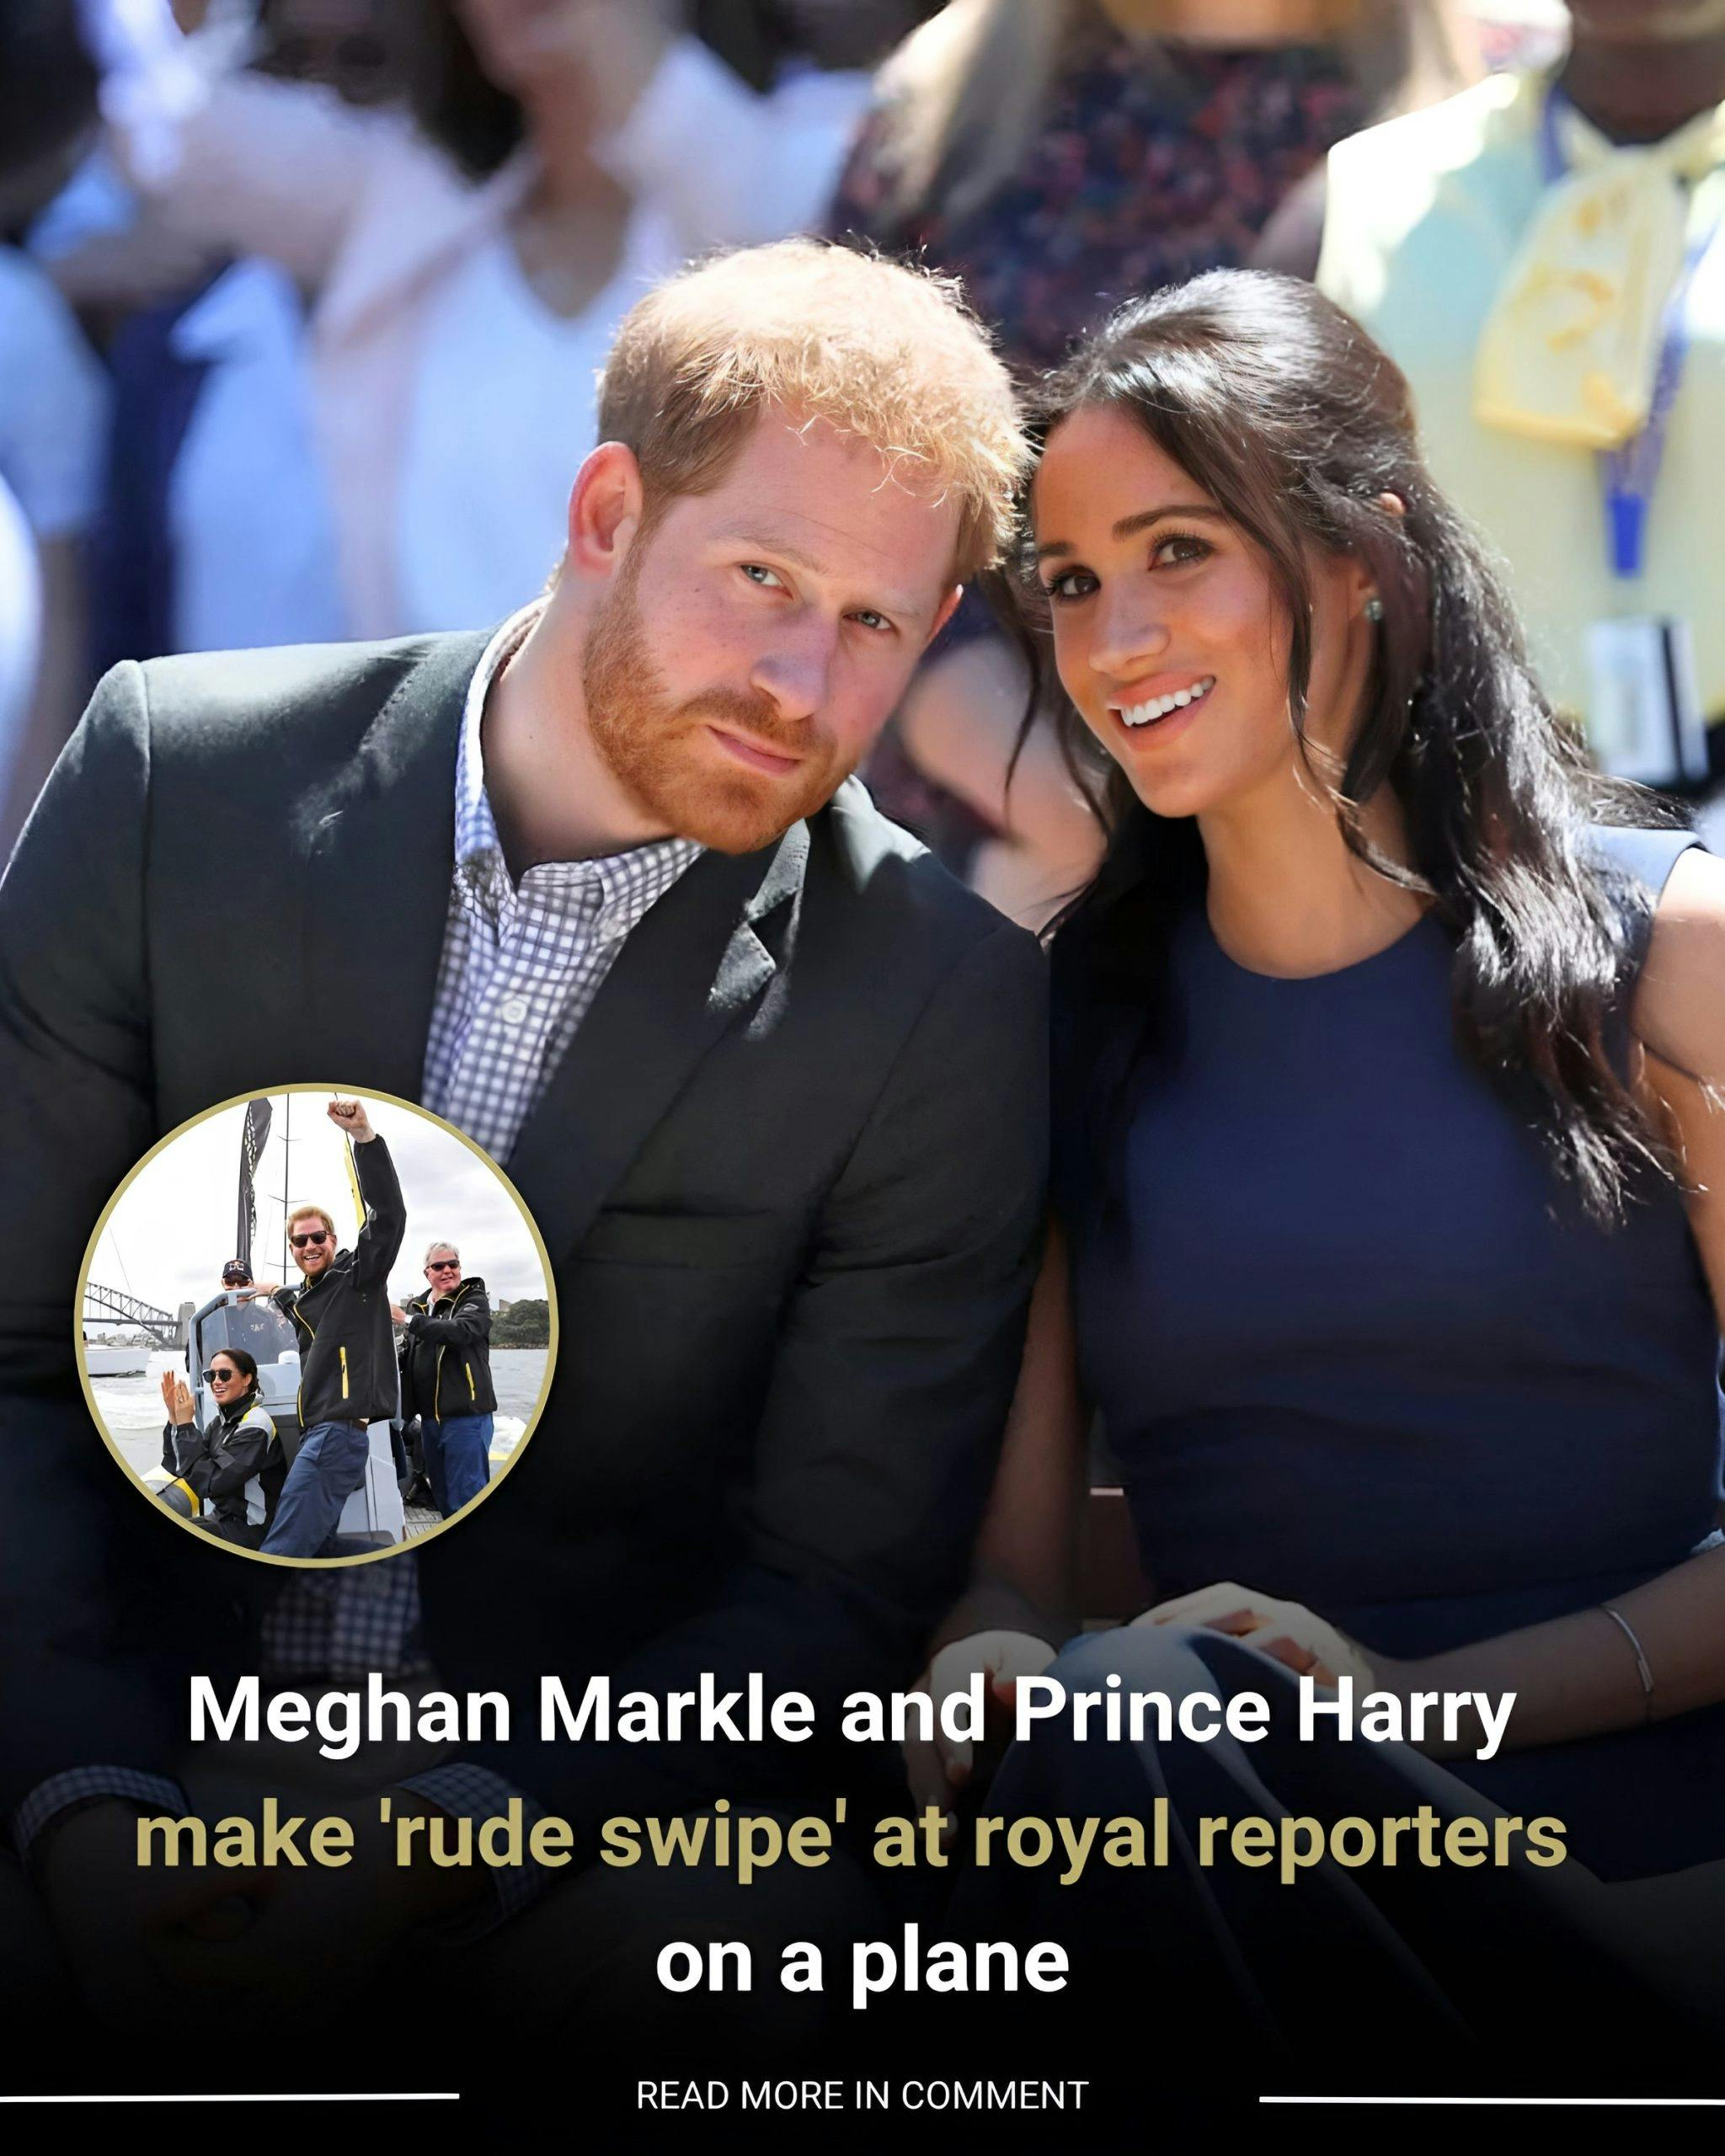 Cover Image for Meghan Markle and Prince Harry make ‘rude swipe’ at royal reporters on a plane